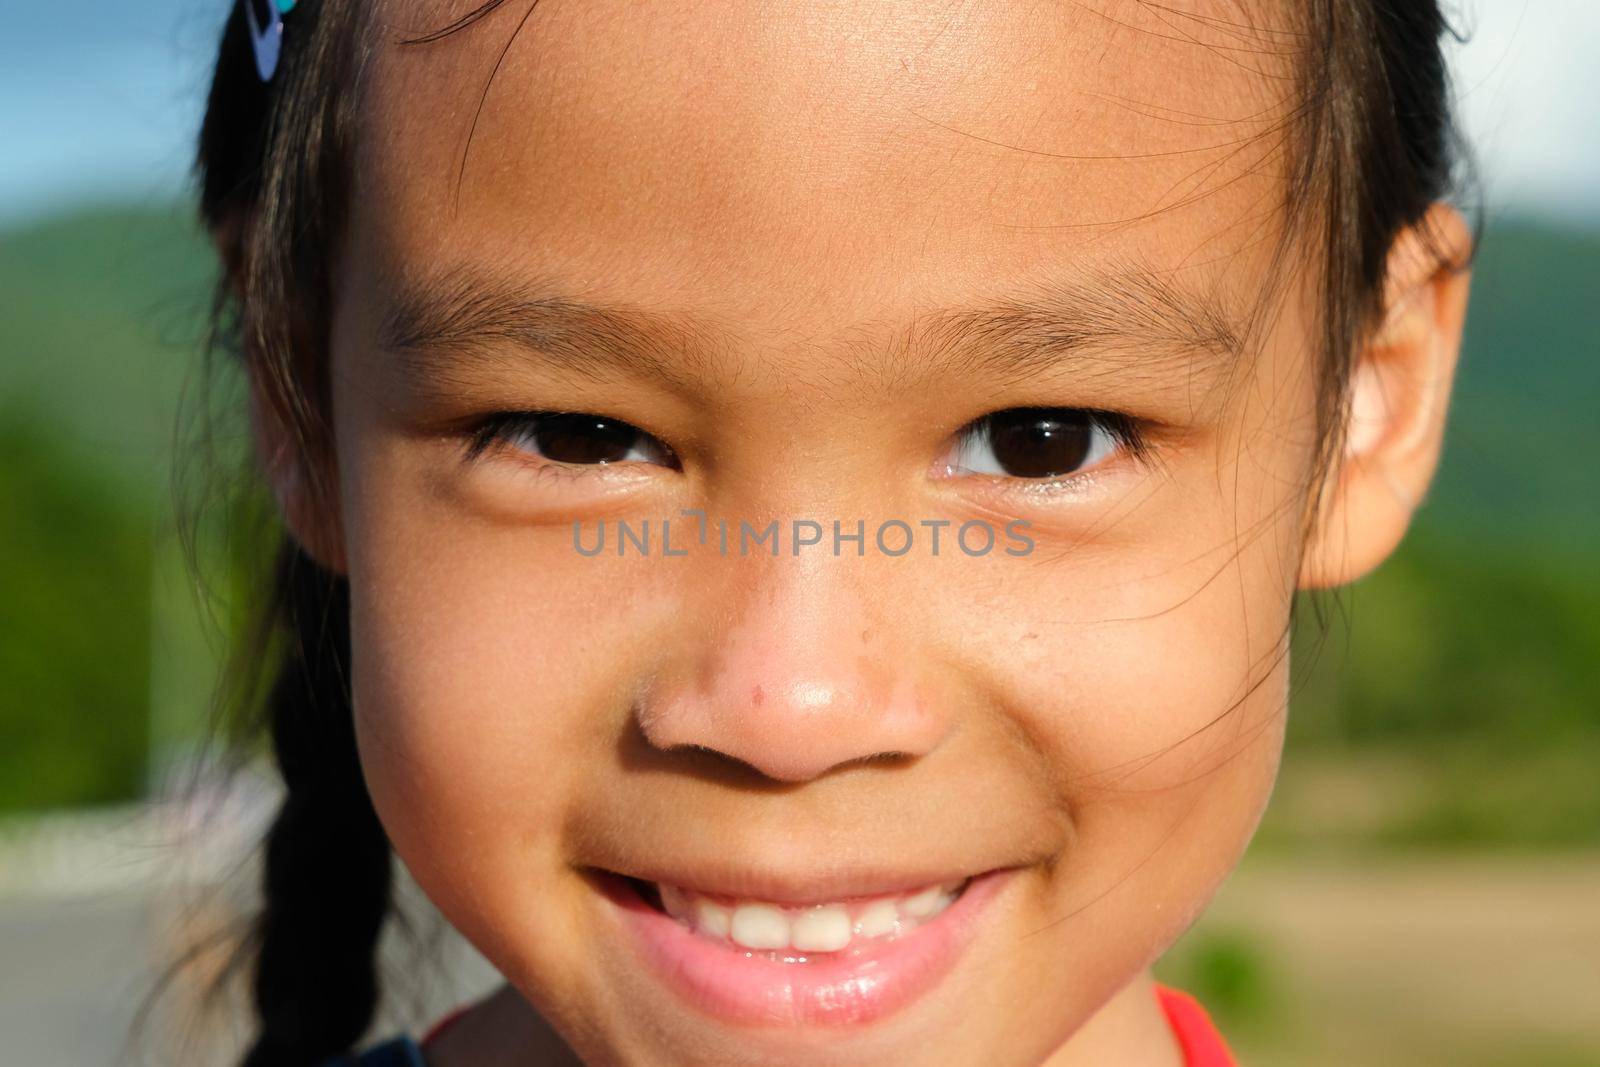 Healthy smiling face of a cute little girl with a sunburn on her face. Happy little Asian girl child showing front teeth with big smile and laughing. Beauty and health of the skin.